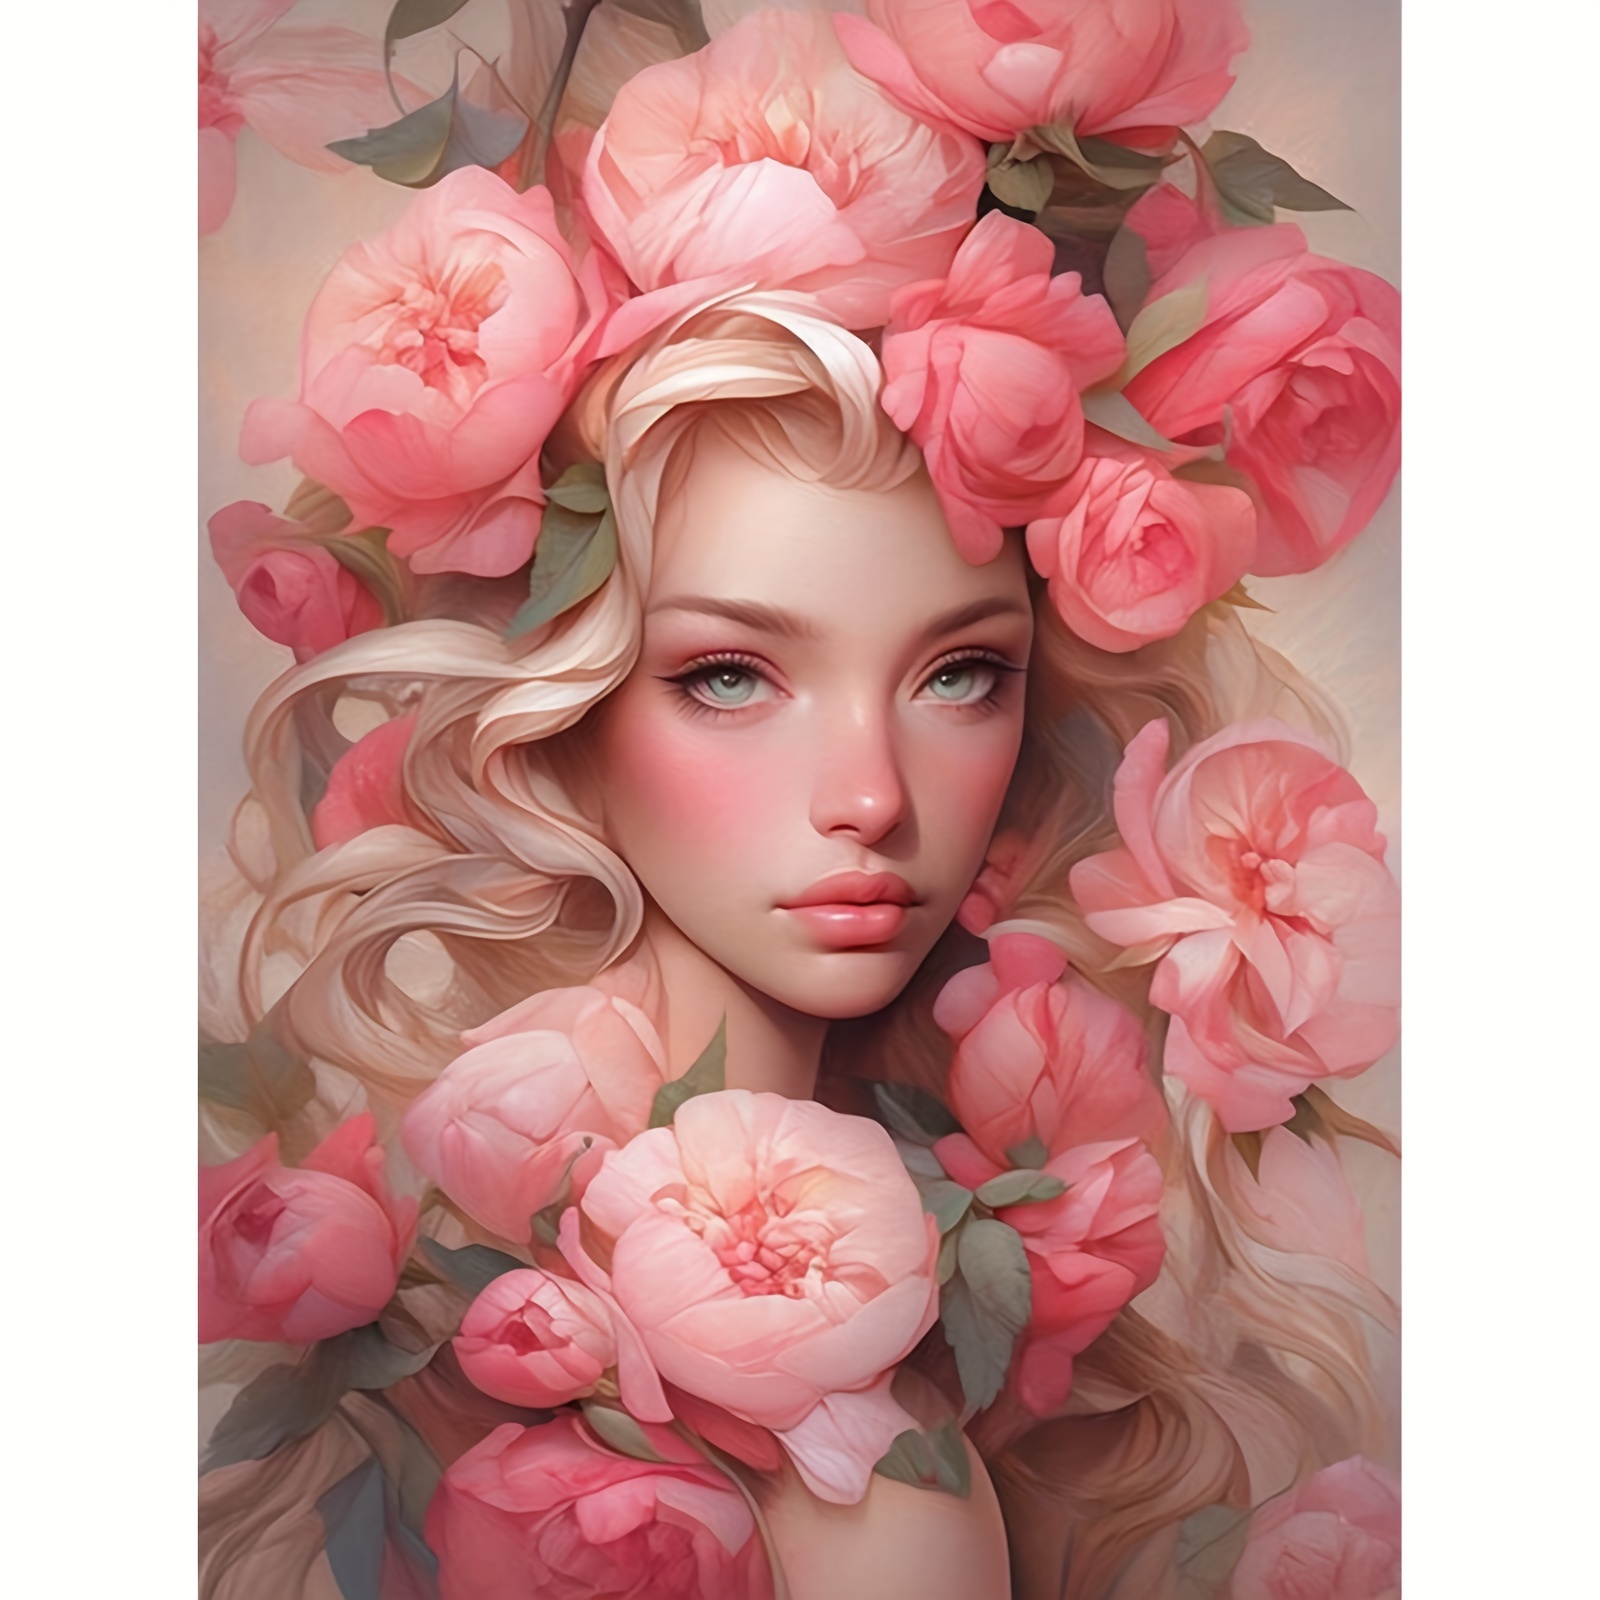 beautiful painting of a girl with flower petals